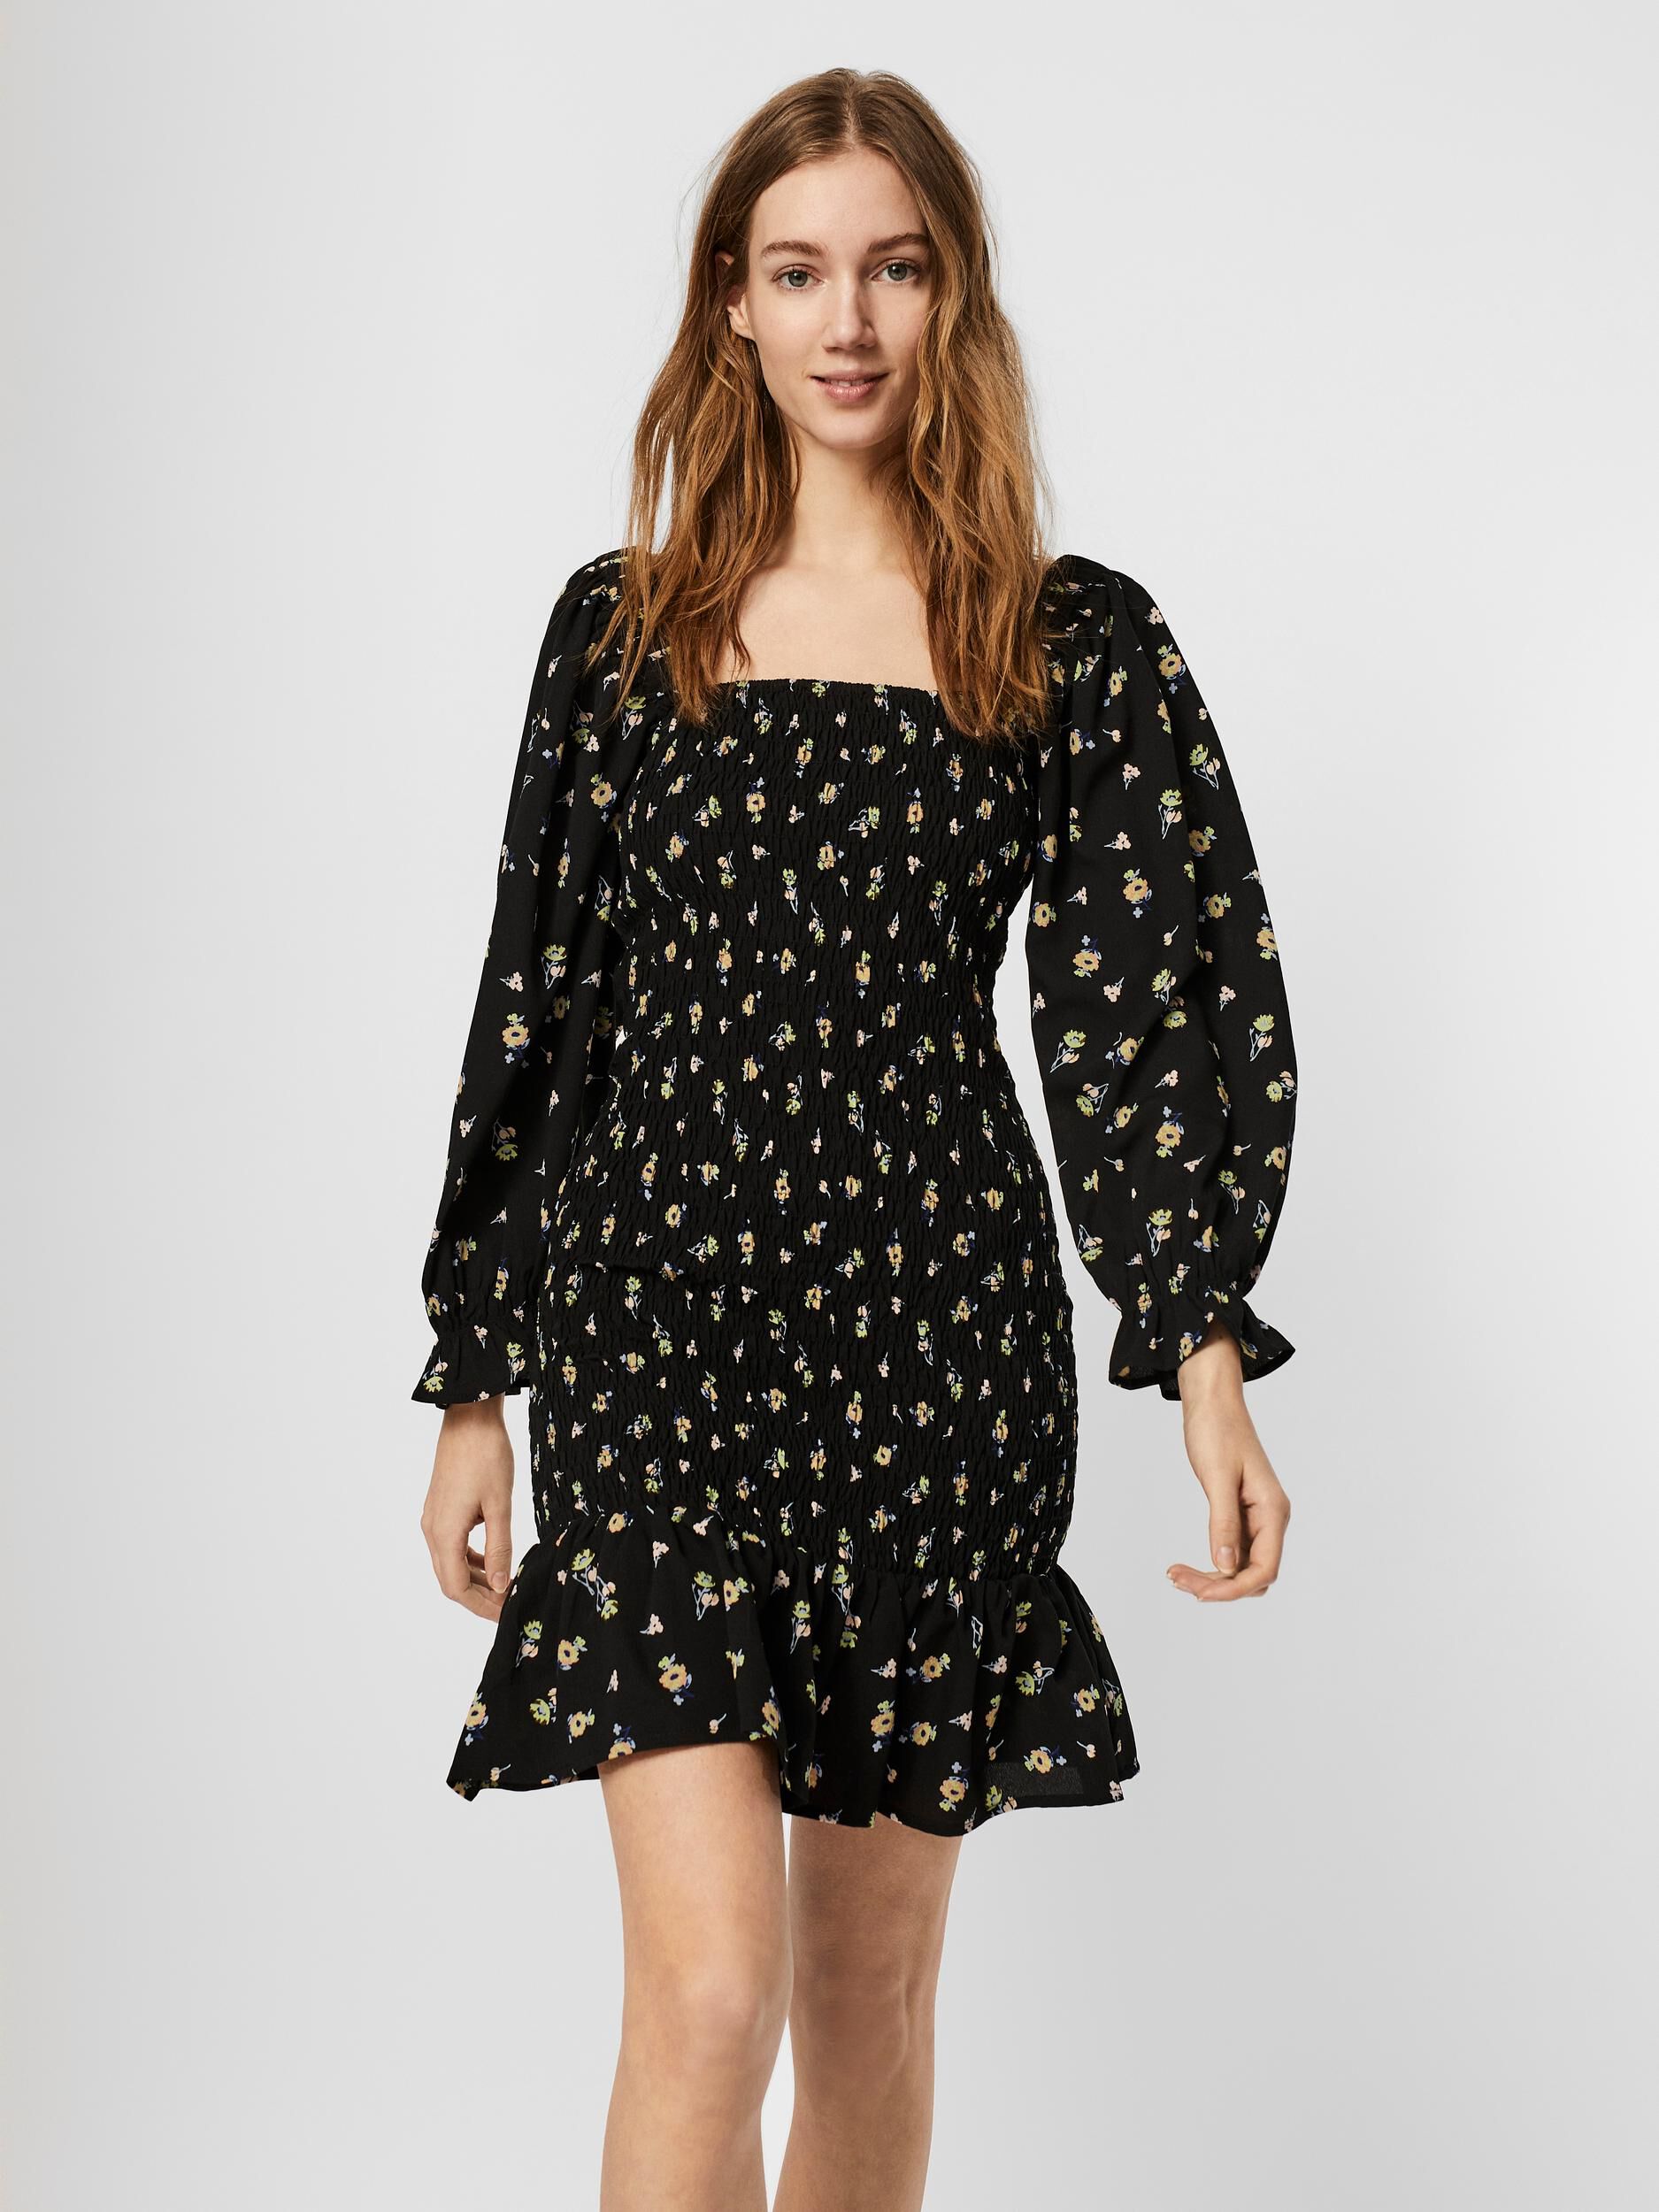 VERO MODA Price reduced from $ 69.00 to $ 25.00 FINAL SALE 